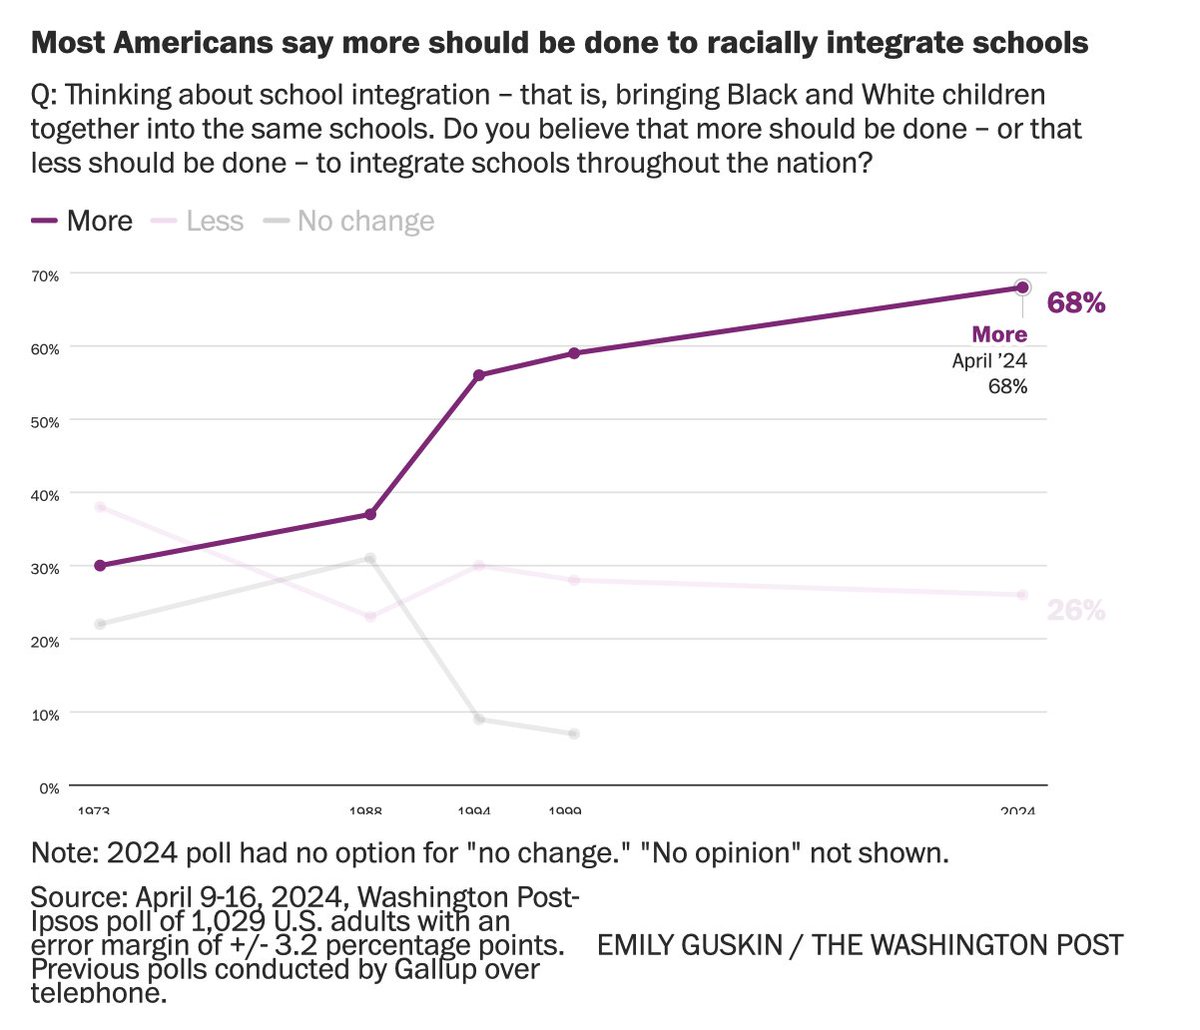 68% of Americans say more should be done to integrate blacks and whites in school. 26% say less.

Of course, no one stops whites from moving their children into black schools but they don't. This is the difference between stated (politics) and revealed preferences (markets).